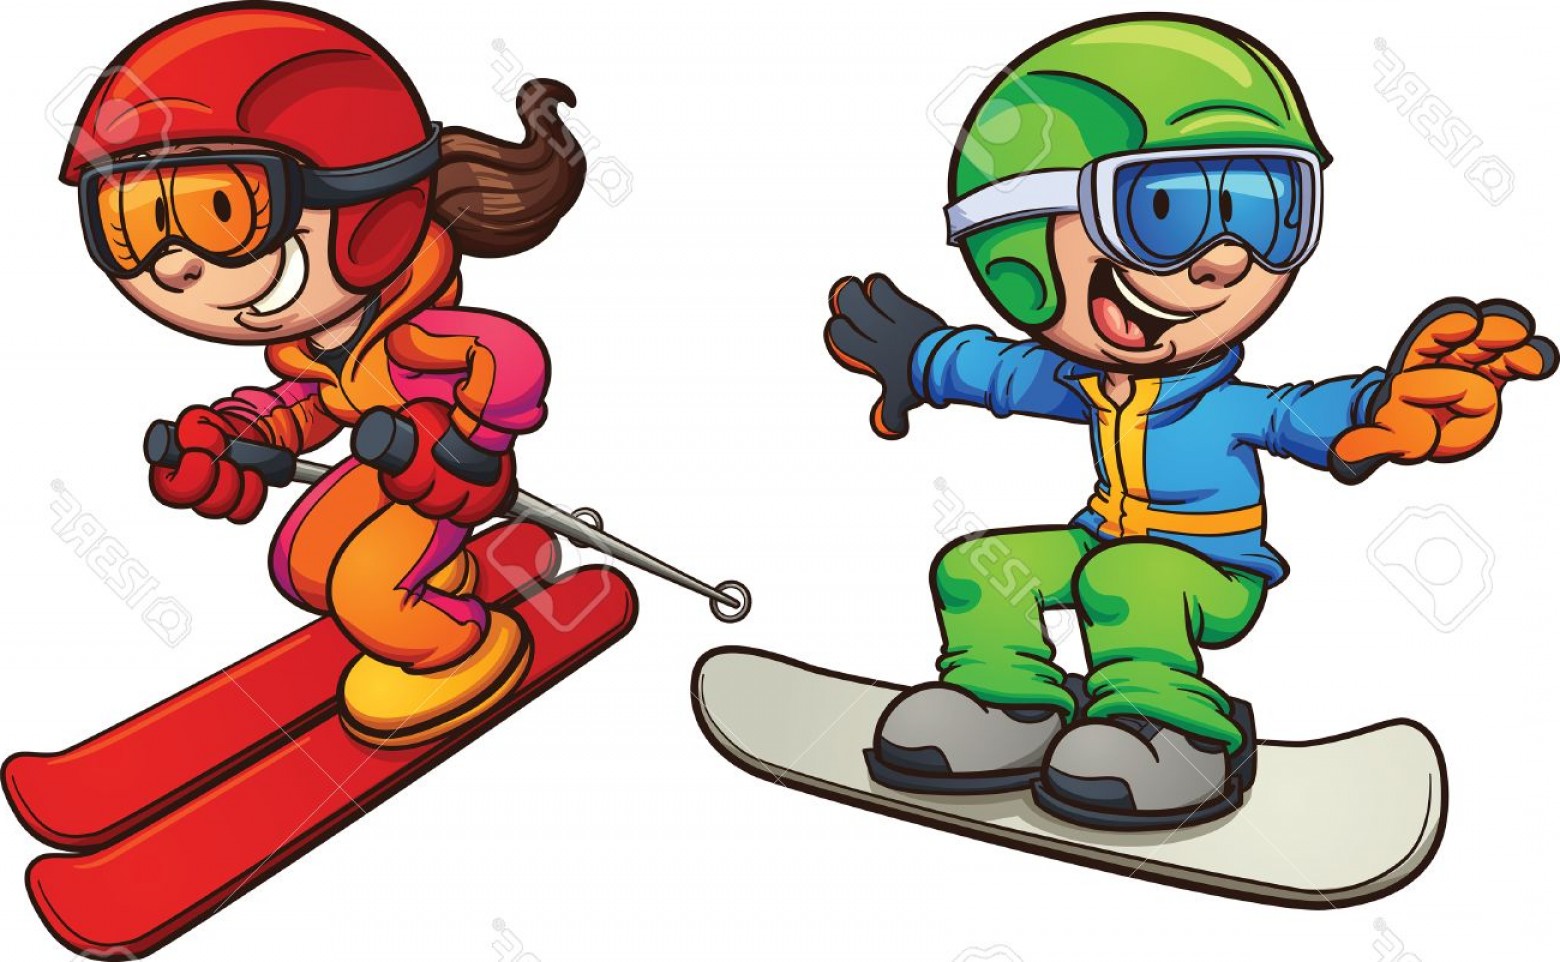 Animated Snowboarding Clipart